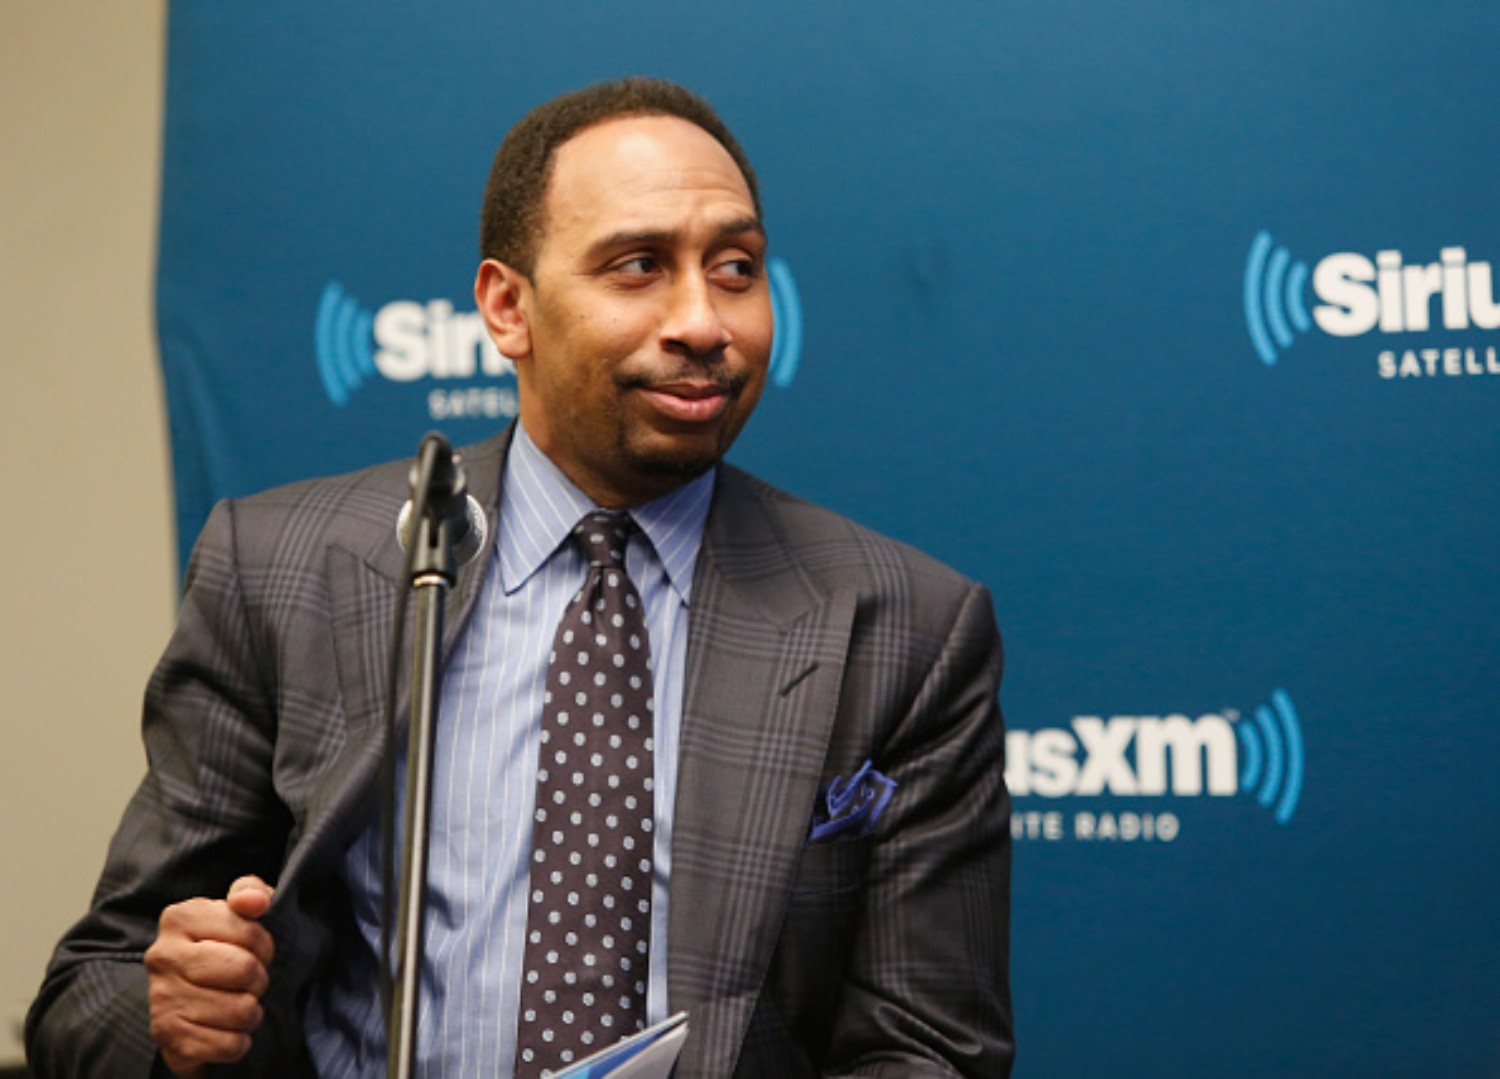 Stephen A. Smith is a well-known sports personality person